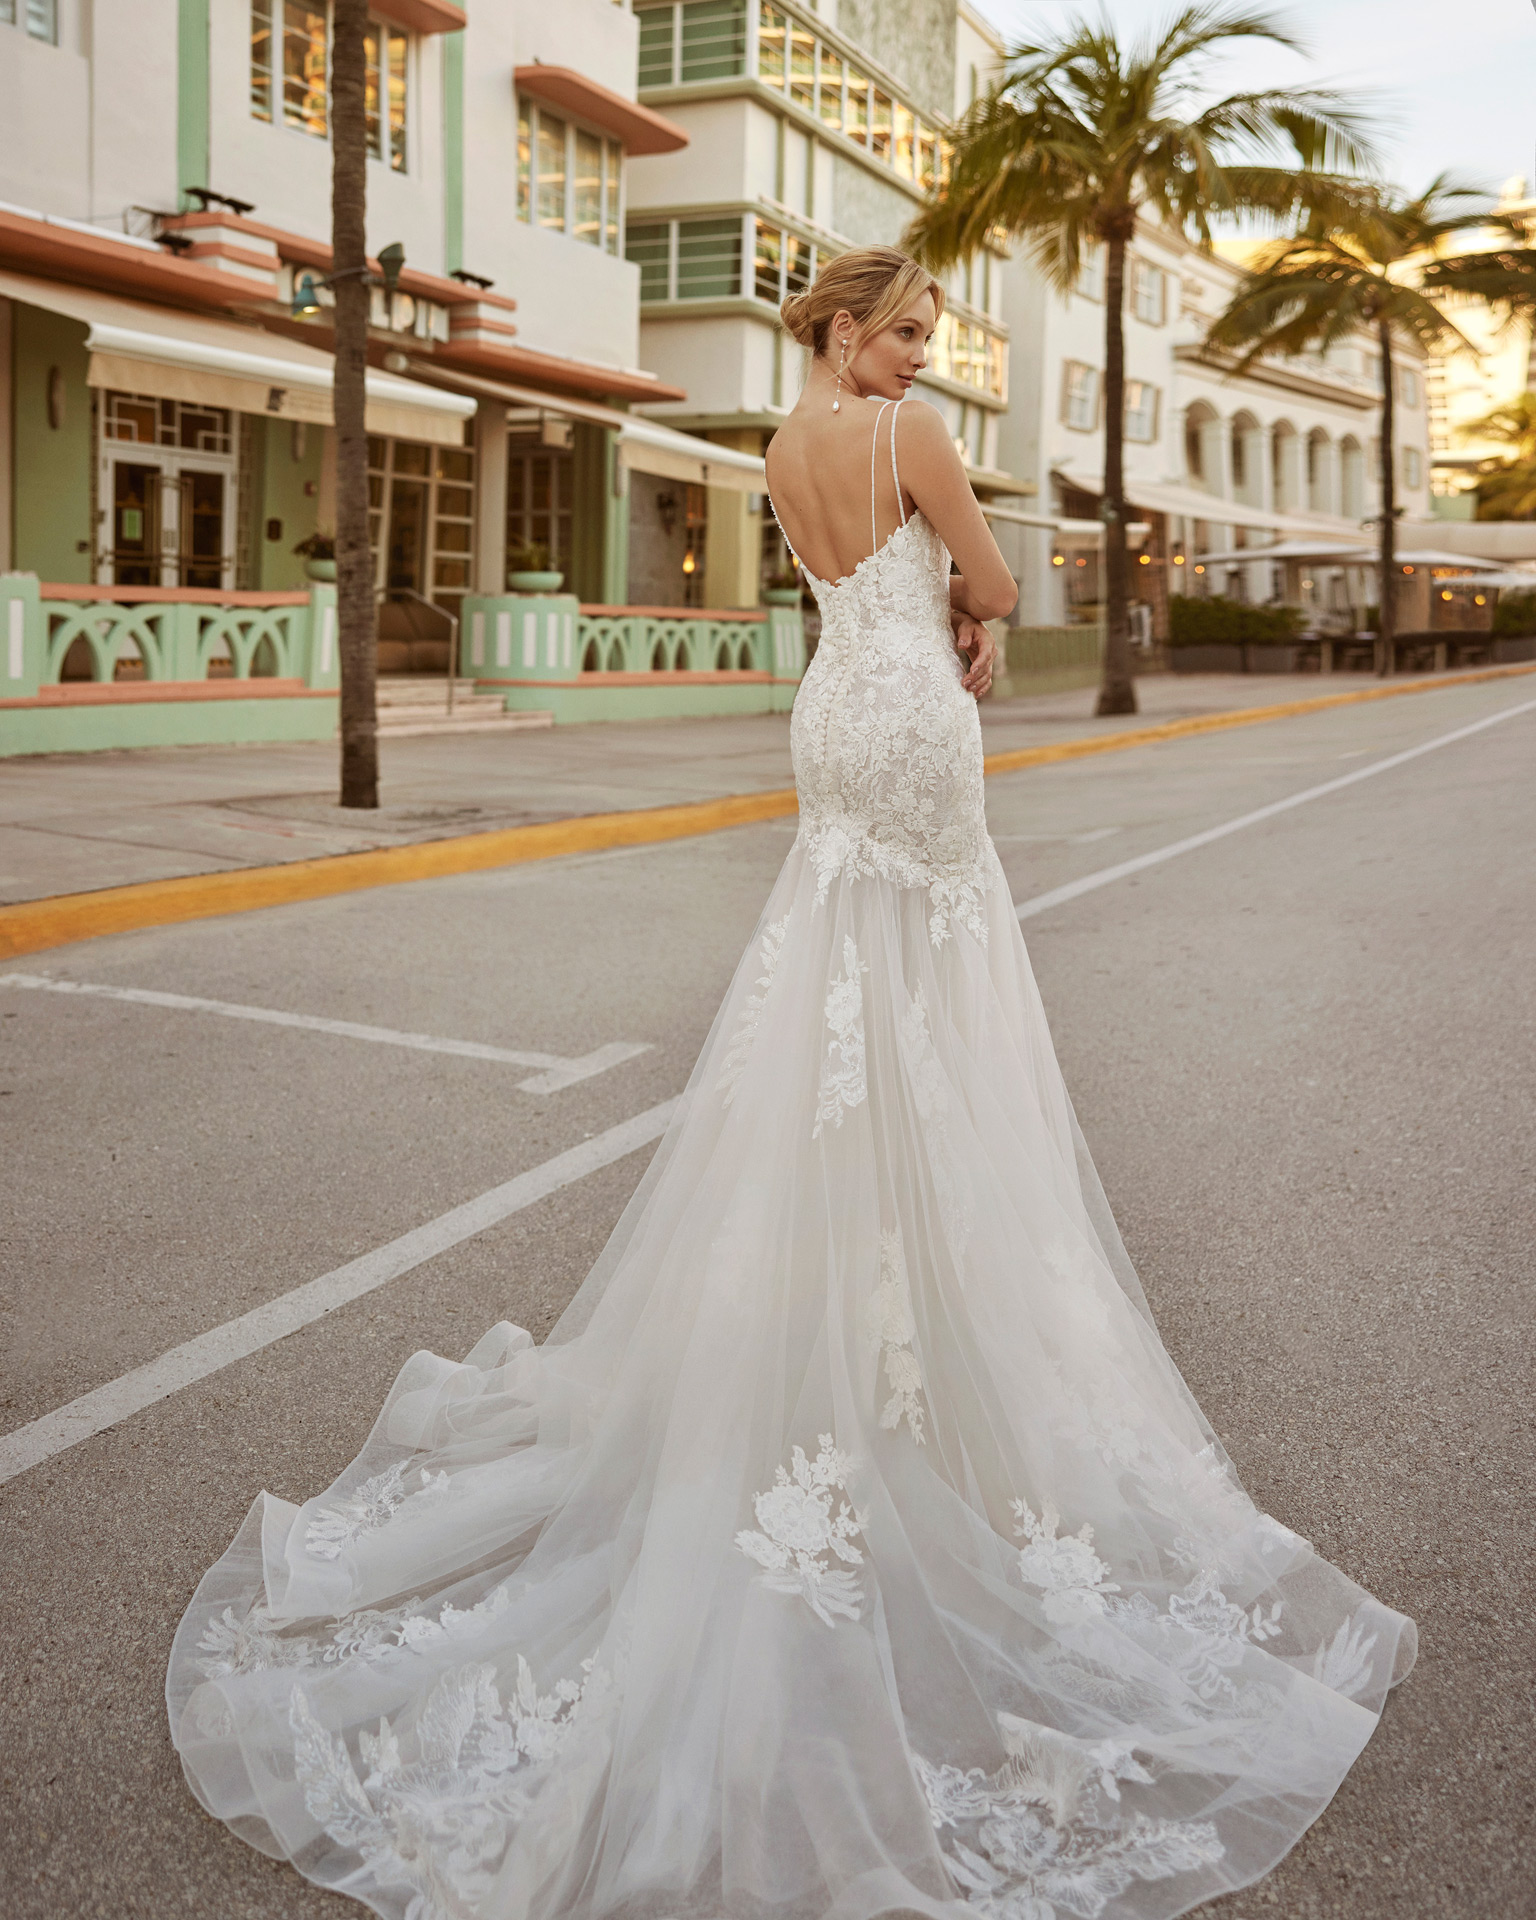 Sexy mermaid wedding dress, made in lace and beadwork. This delicate Luna Novias design features a V-neckline, open back and straps. LUNA_NOVIAS.